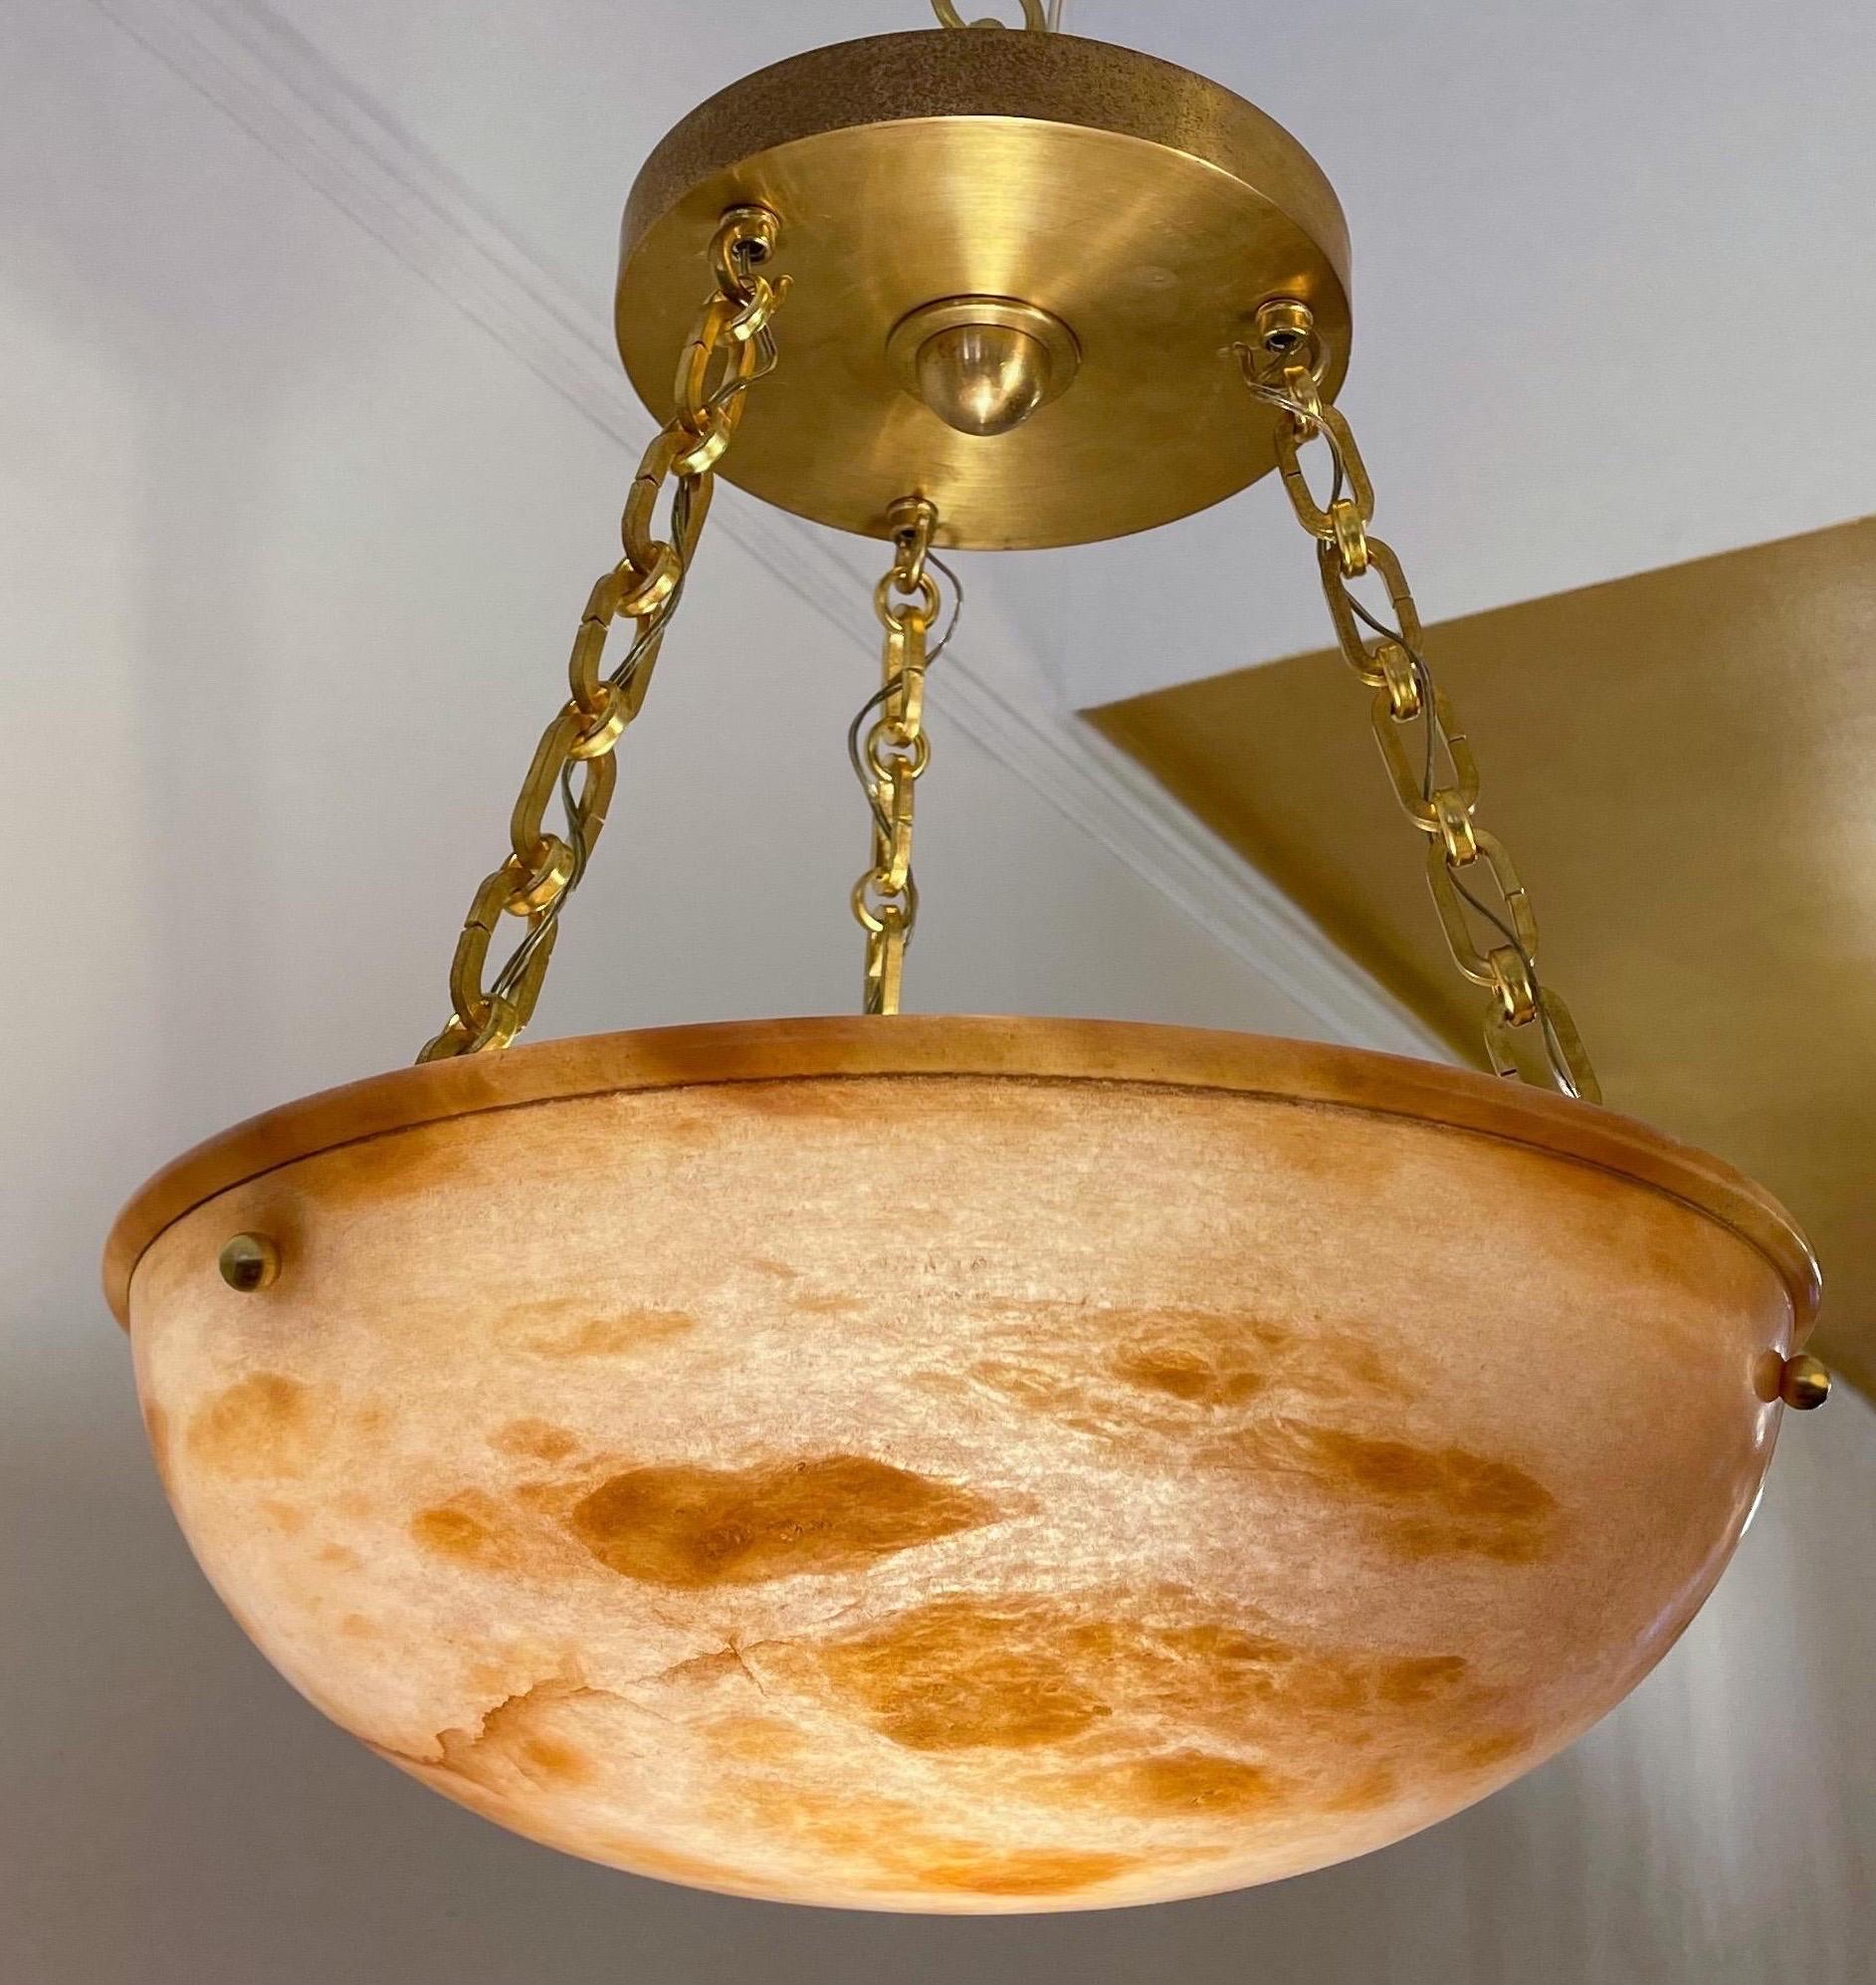 This one is peachy-keen! When you need a subtle bit of color, this elegant pendant is perfect! Newly rewired on chains with a matching brass canopy, the light can be rewired again to your custom overall drop with rods or electrified roping in our